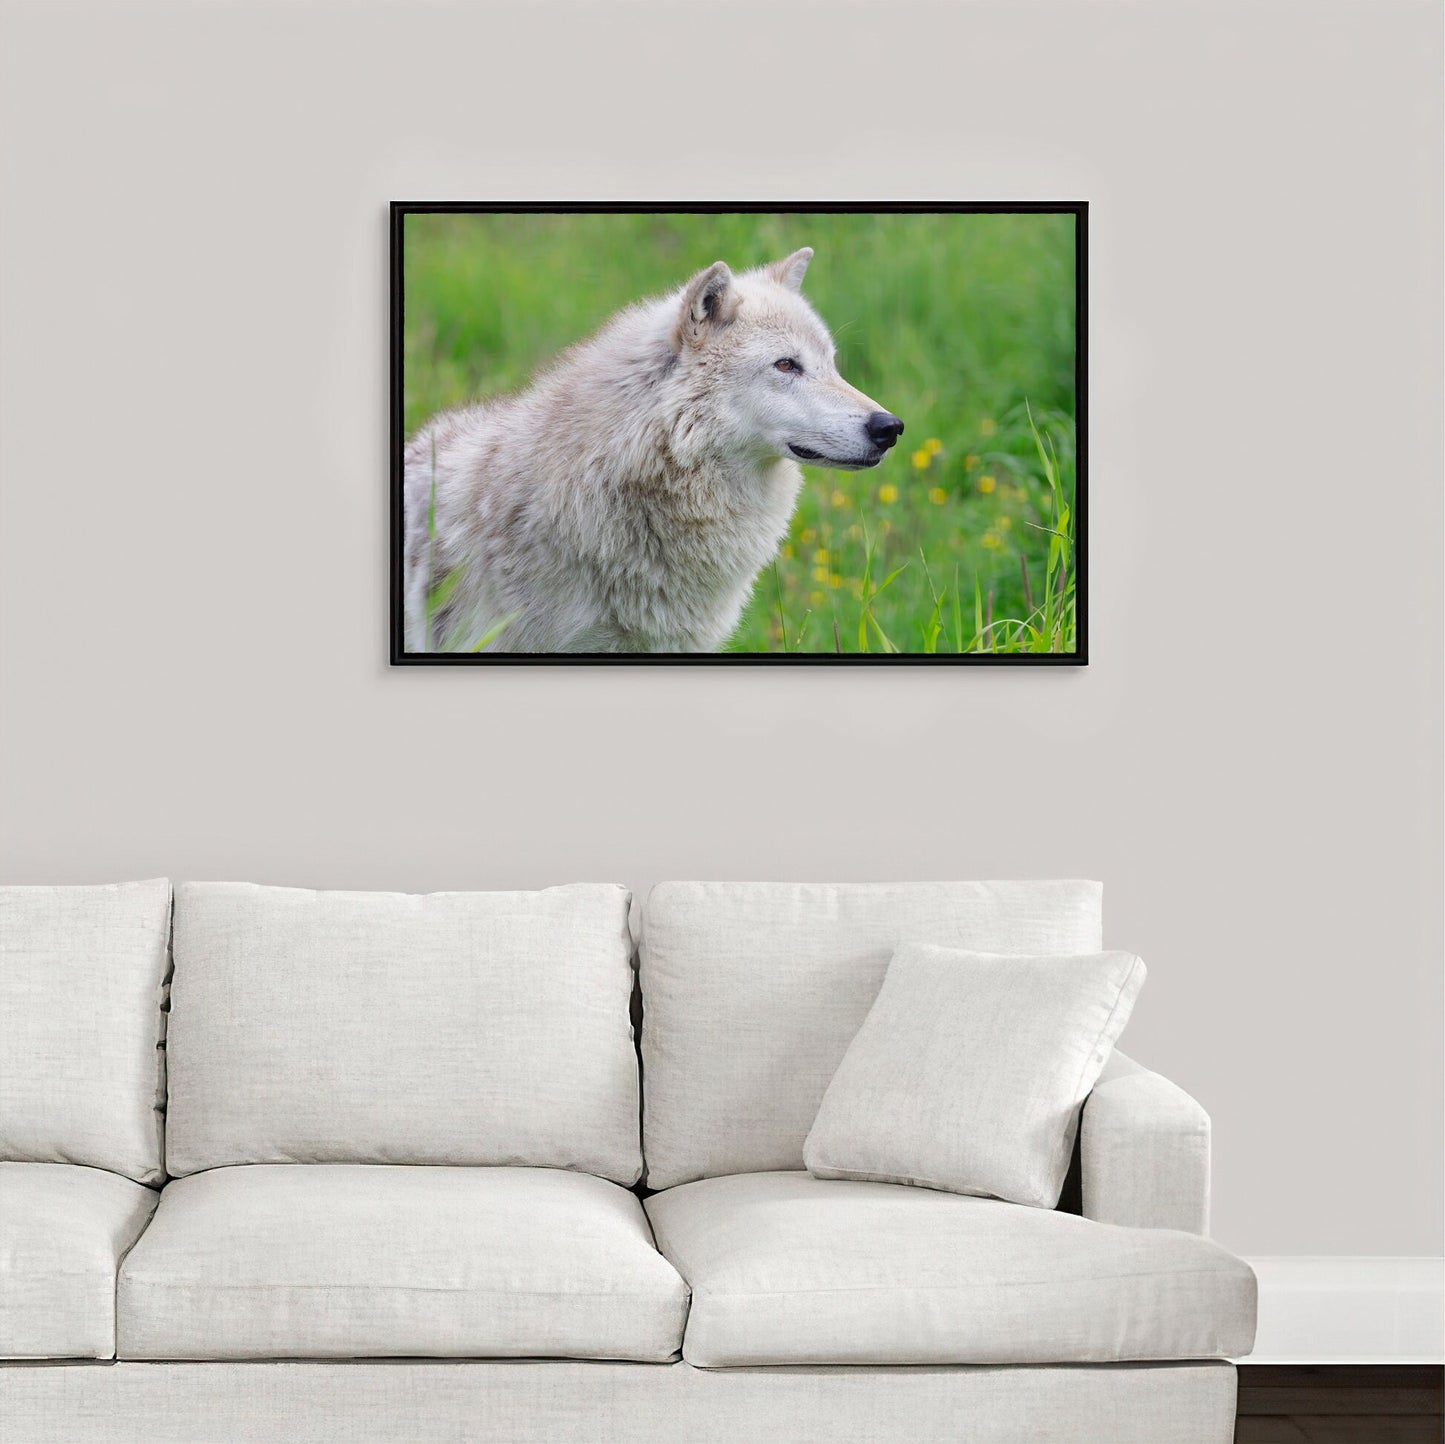 Wolf photo print, Wolf portrait, wildlife photography, wolf pictures, animal wall art decor, large paper or canvas picture, 5x7 to 40x60"